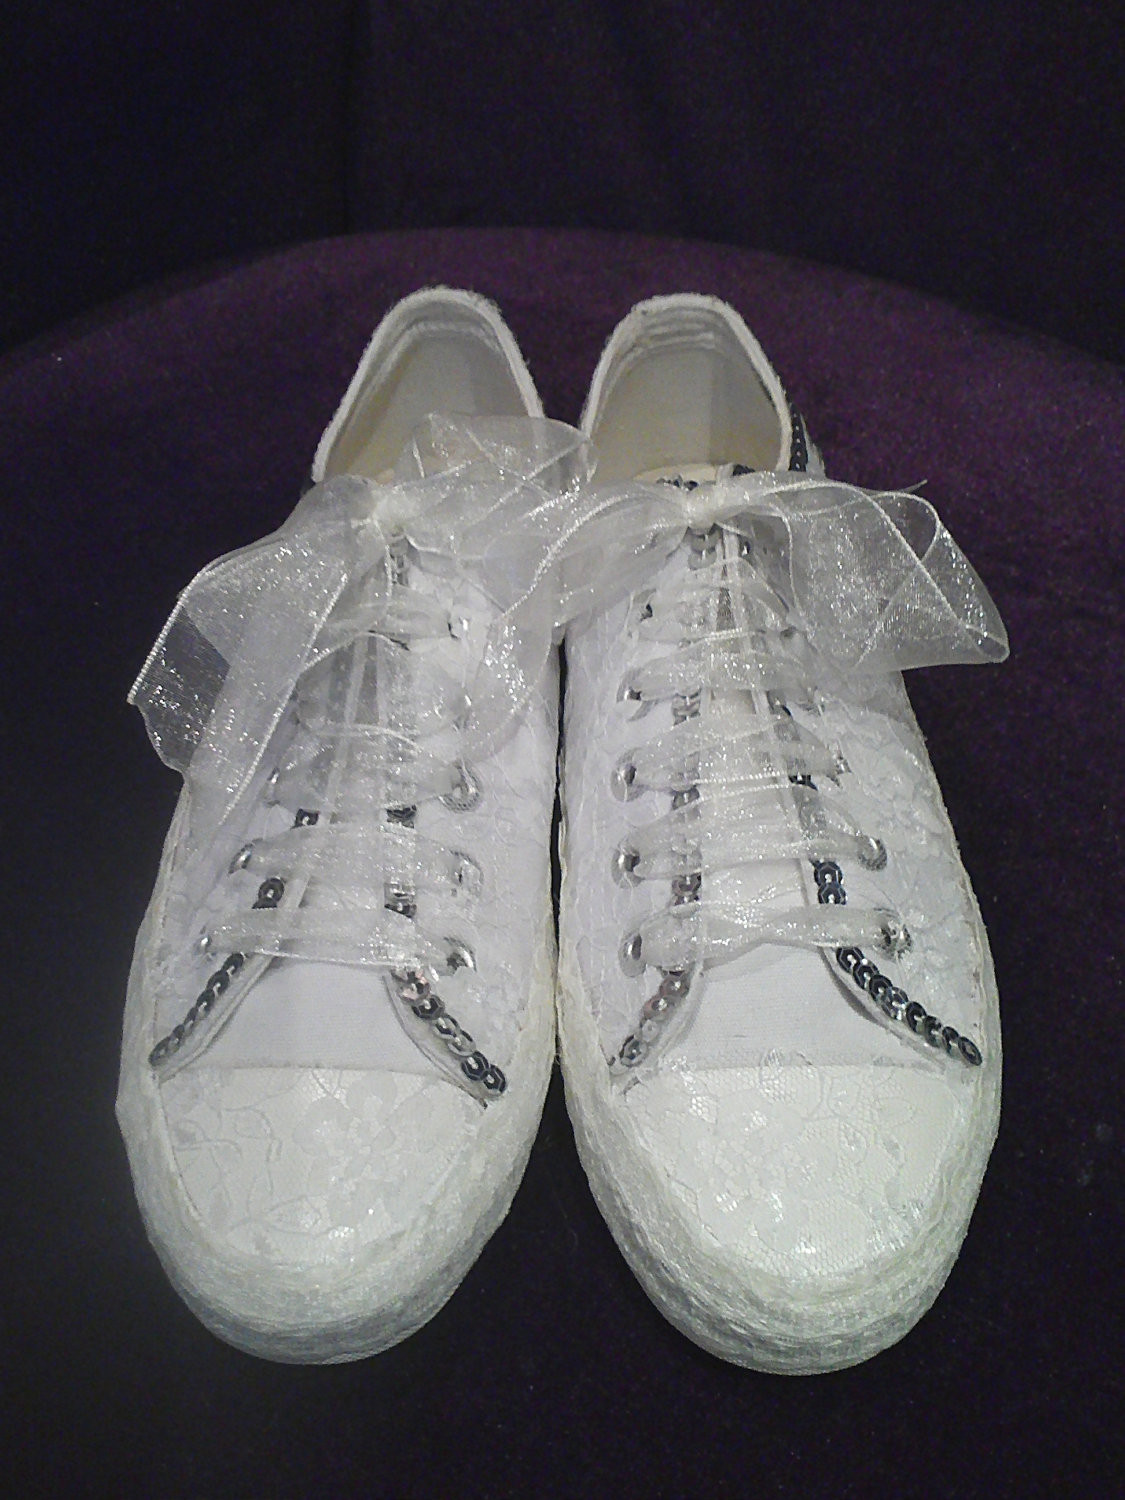 Custom Converse Wedding Shoes
 Converse sneaker handmade Lace bridal shoes by